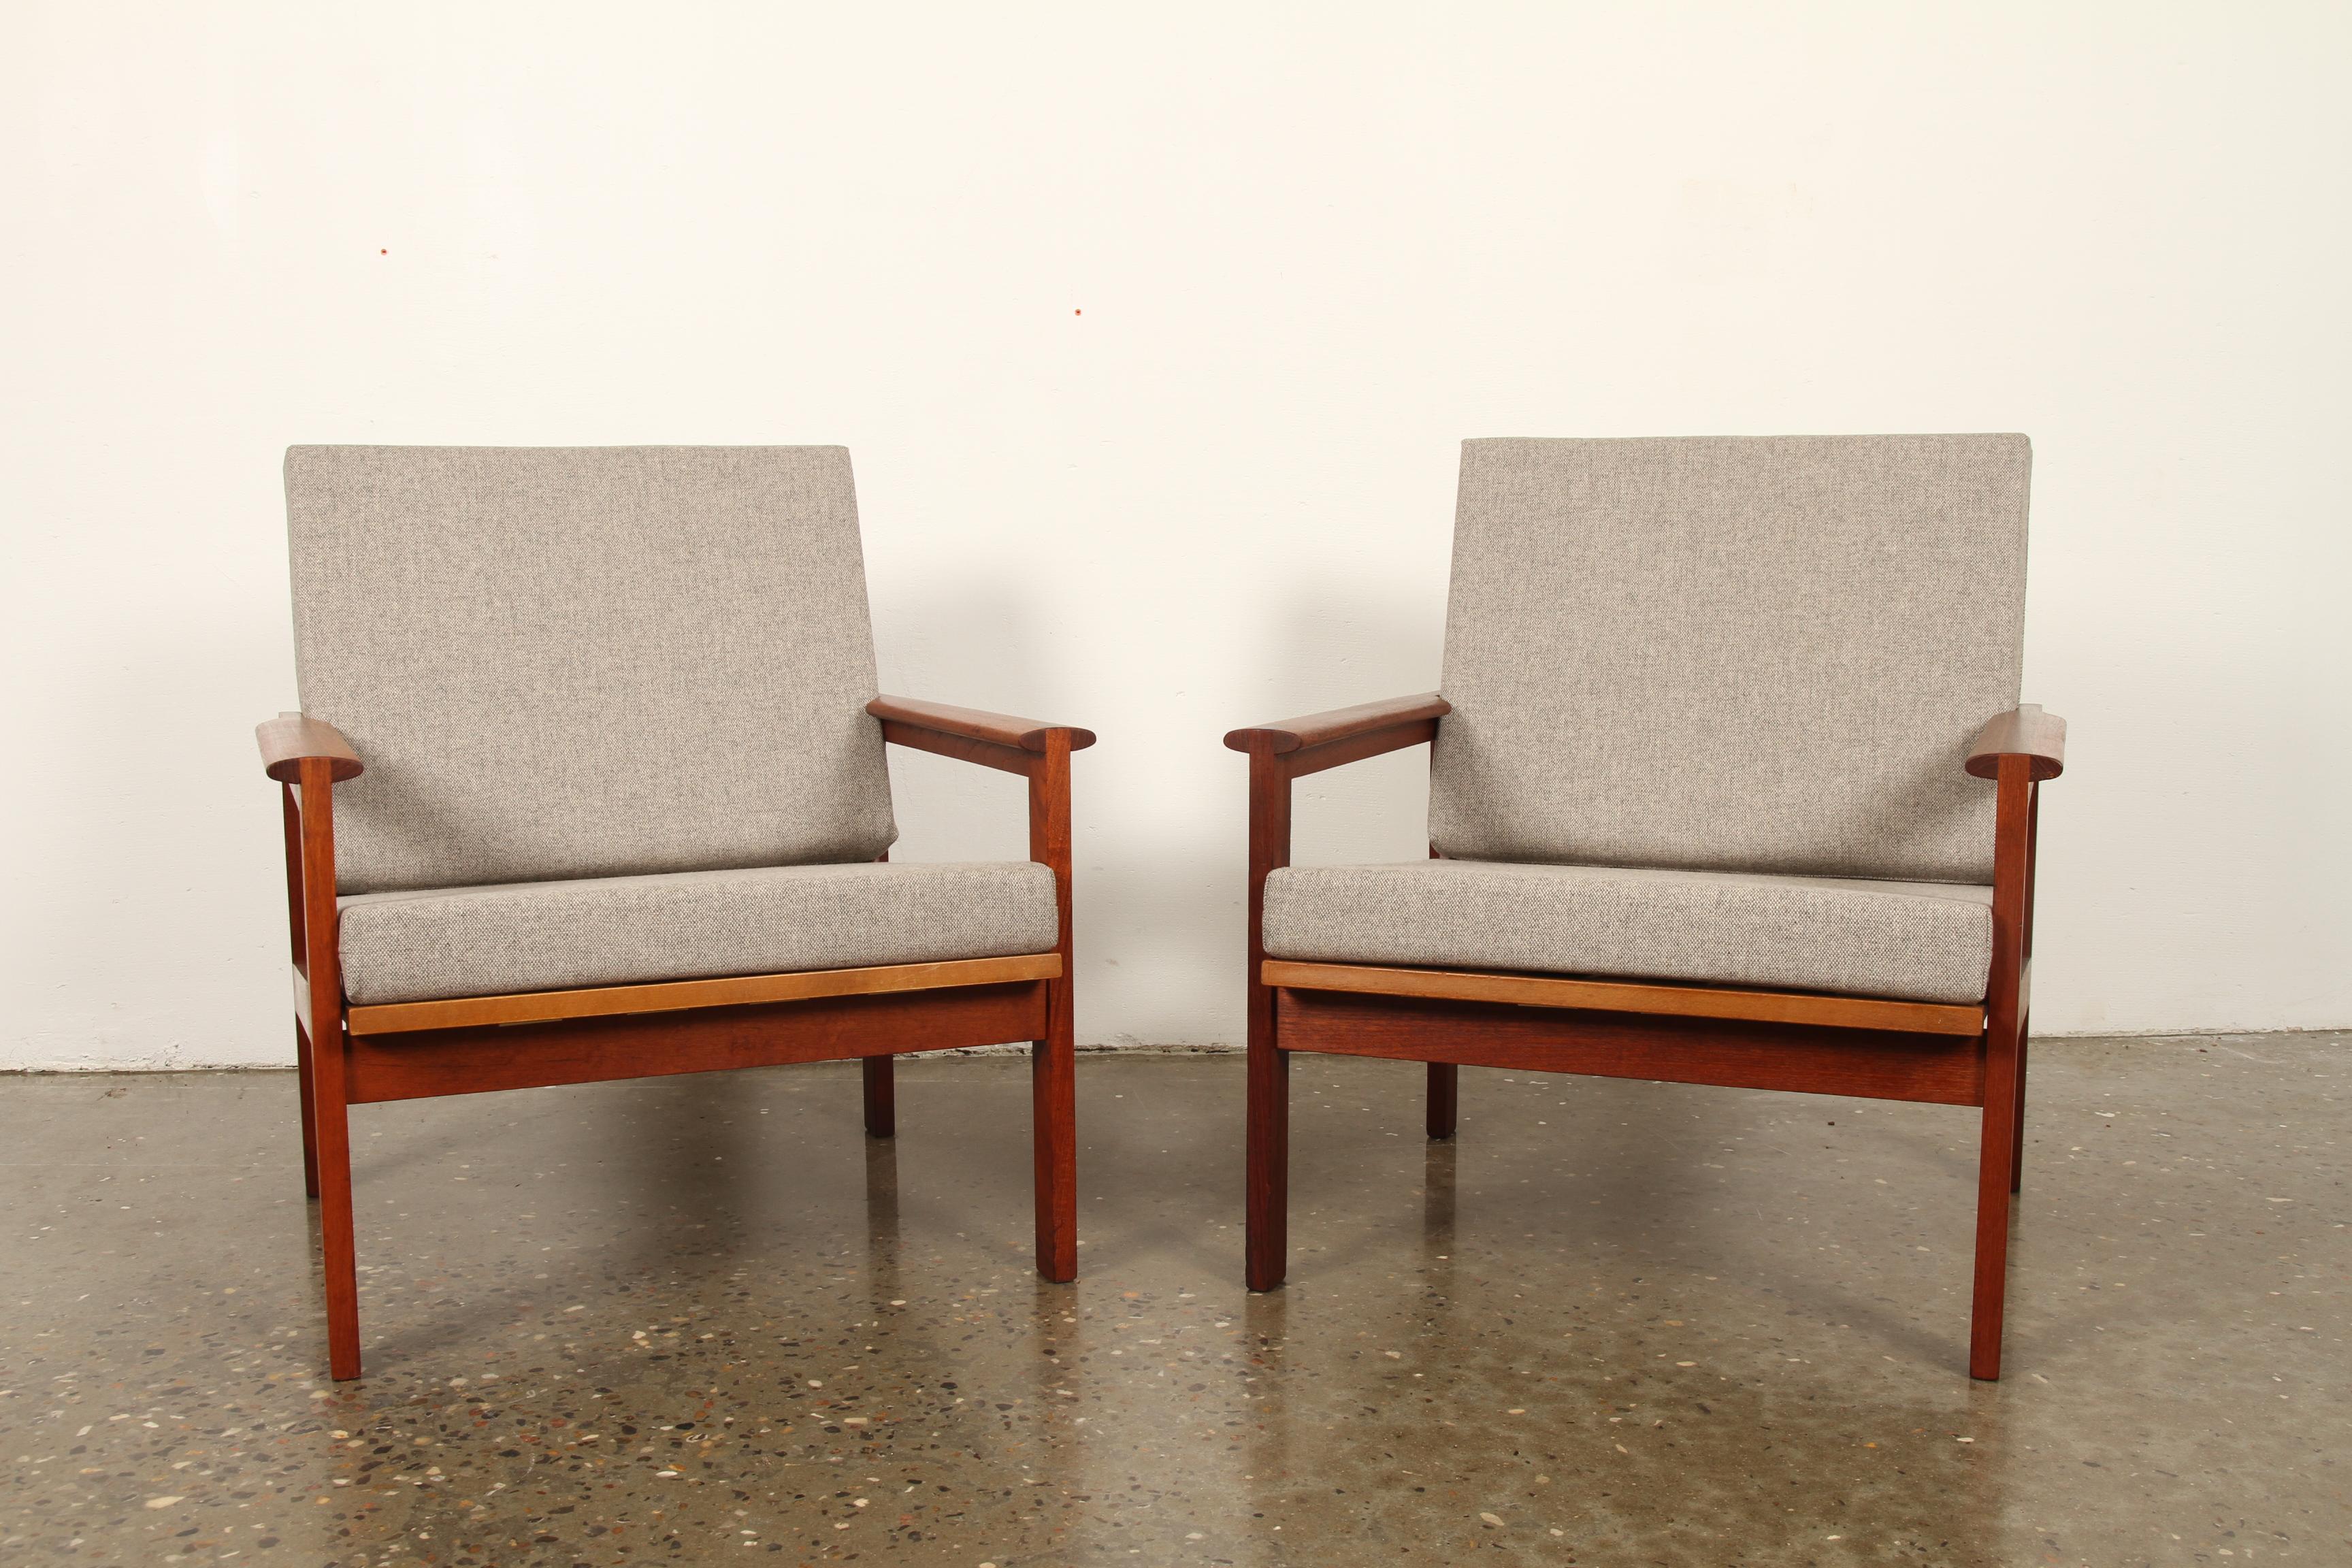 Stylish pair of Mid-Century Modern easy chairs in solid teak designed by Illum Wikkelsø in 1959 and made by Niels Eilersen in the 60s in Denmark. Classic Danish modern club armchairs. New custom made cushions and new straps. Ready to use.